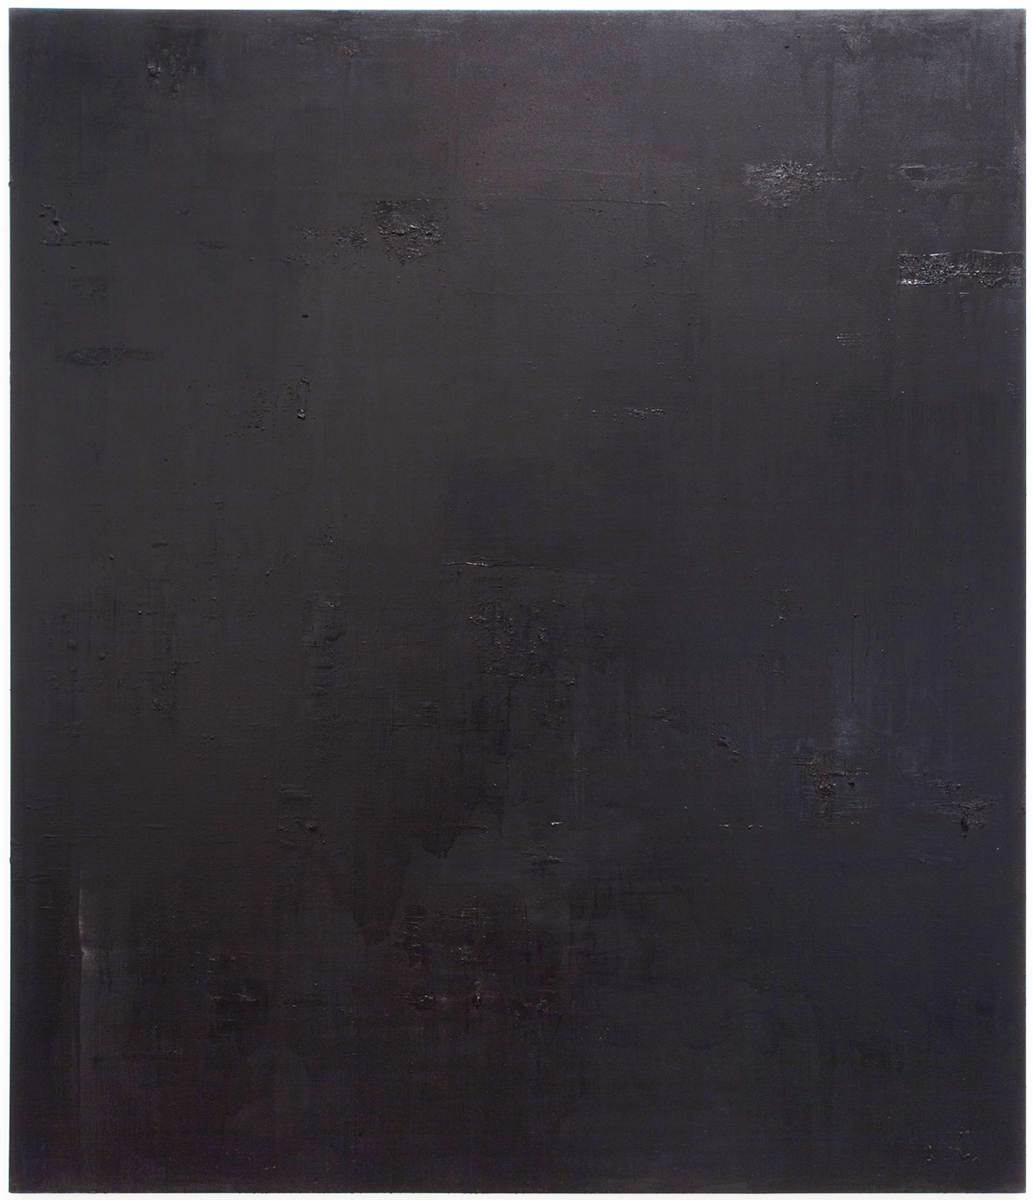  Untitled black monochrome painting (5.10.PBk9.CI77267/PBk11.Fe3O4) from the Frequency10. series. Oil, grit, graphite on canvas, 213.36cm x 182.88cm (84 inches x 72 inches), 2016-2017.    